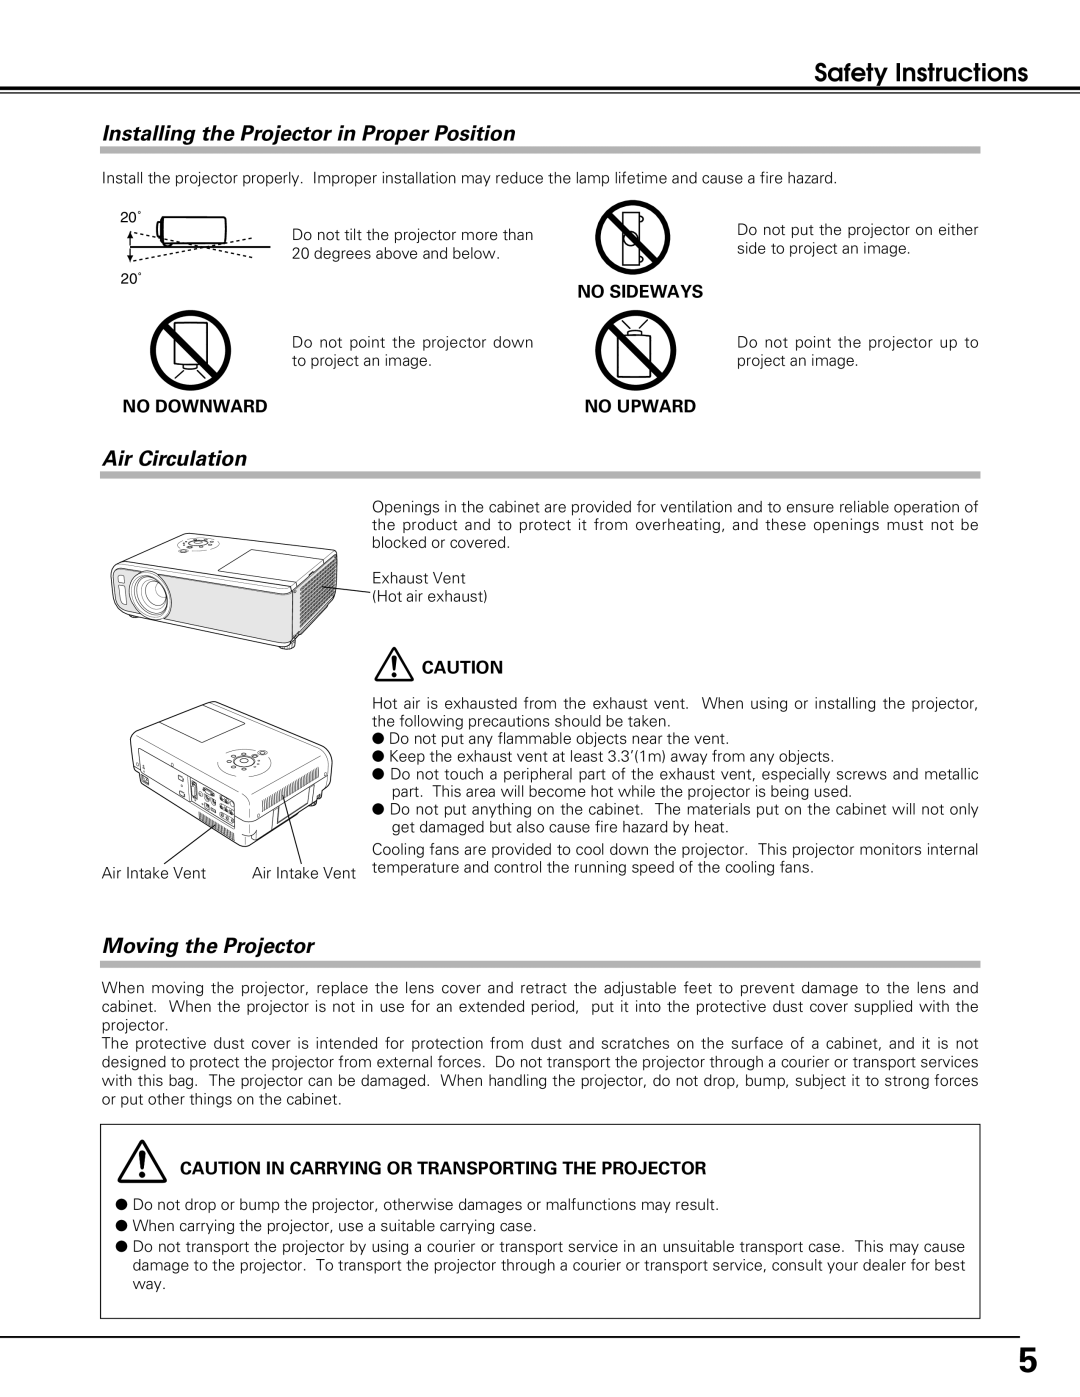 Sanyo PLC-SU60 Safety Instructions, Installing the Projector in Proper Position, Air Circulation, Moving the Projector 